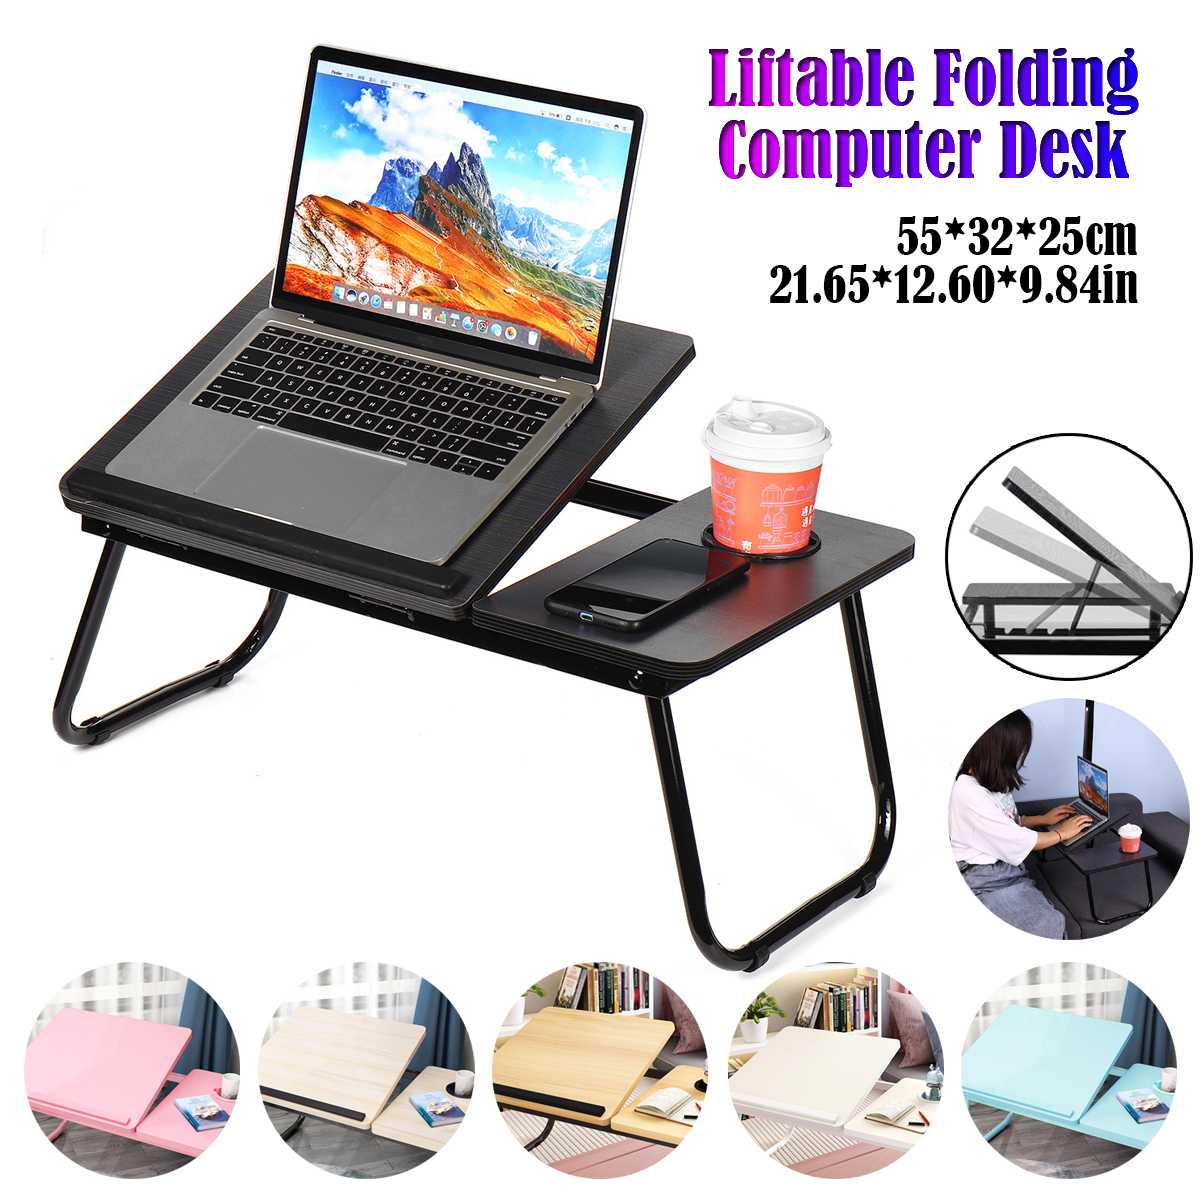 Adjustable Folding Laptop Table Notebook Desk Breakfast Serving Bed Trays Foldable Computer Desk Stand Lazy Bed Tray